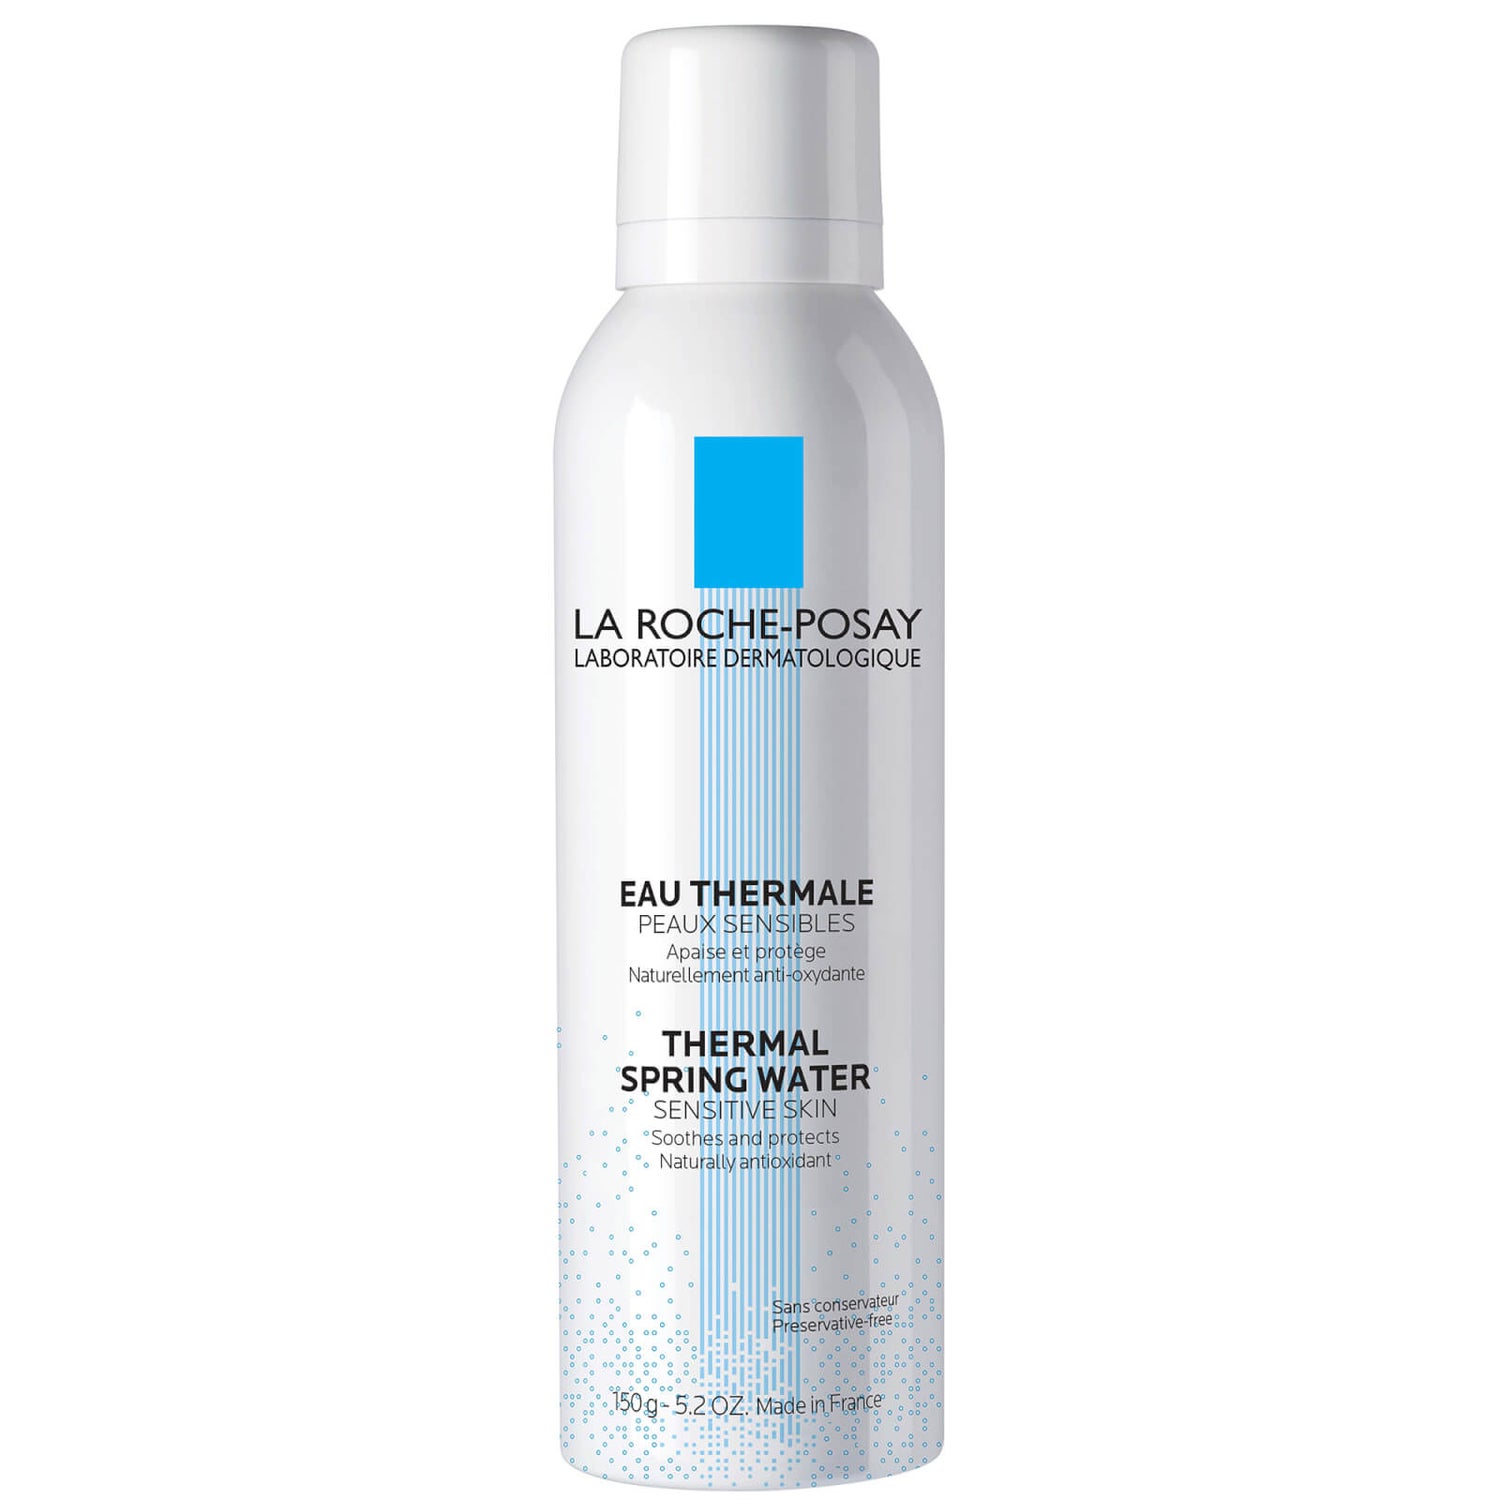 La Roche-Posay Thermal Spring Water Face Mist (Various Sizes)